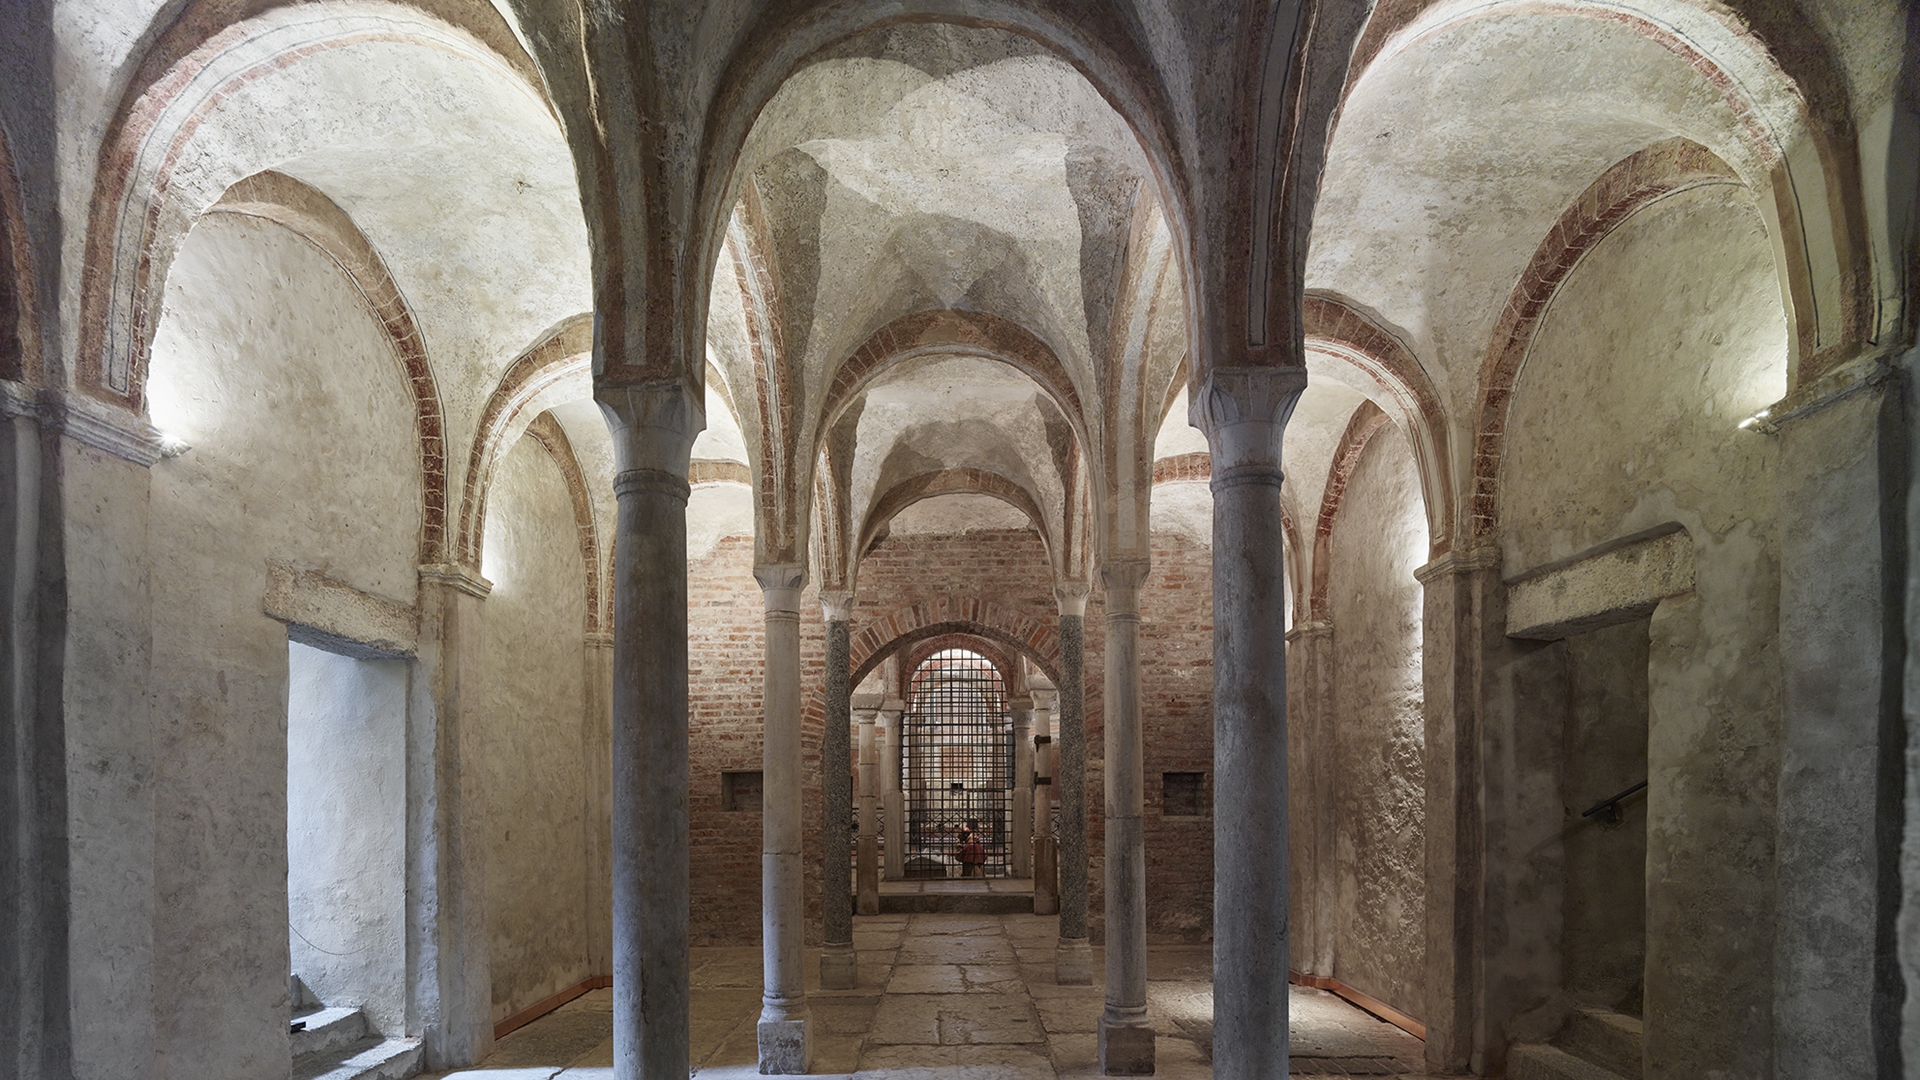 THE RESTORATION OF THE HYPOGEAN CHURCH OF SAN SEPOLCRO IS COMPLETED